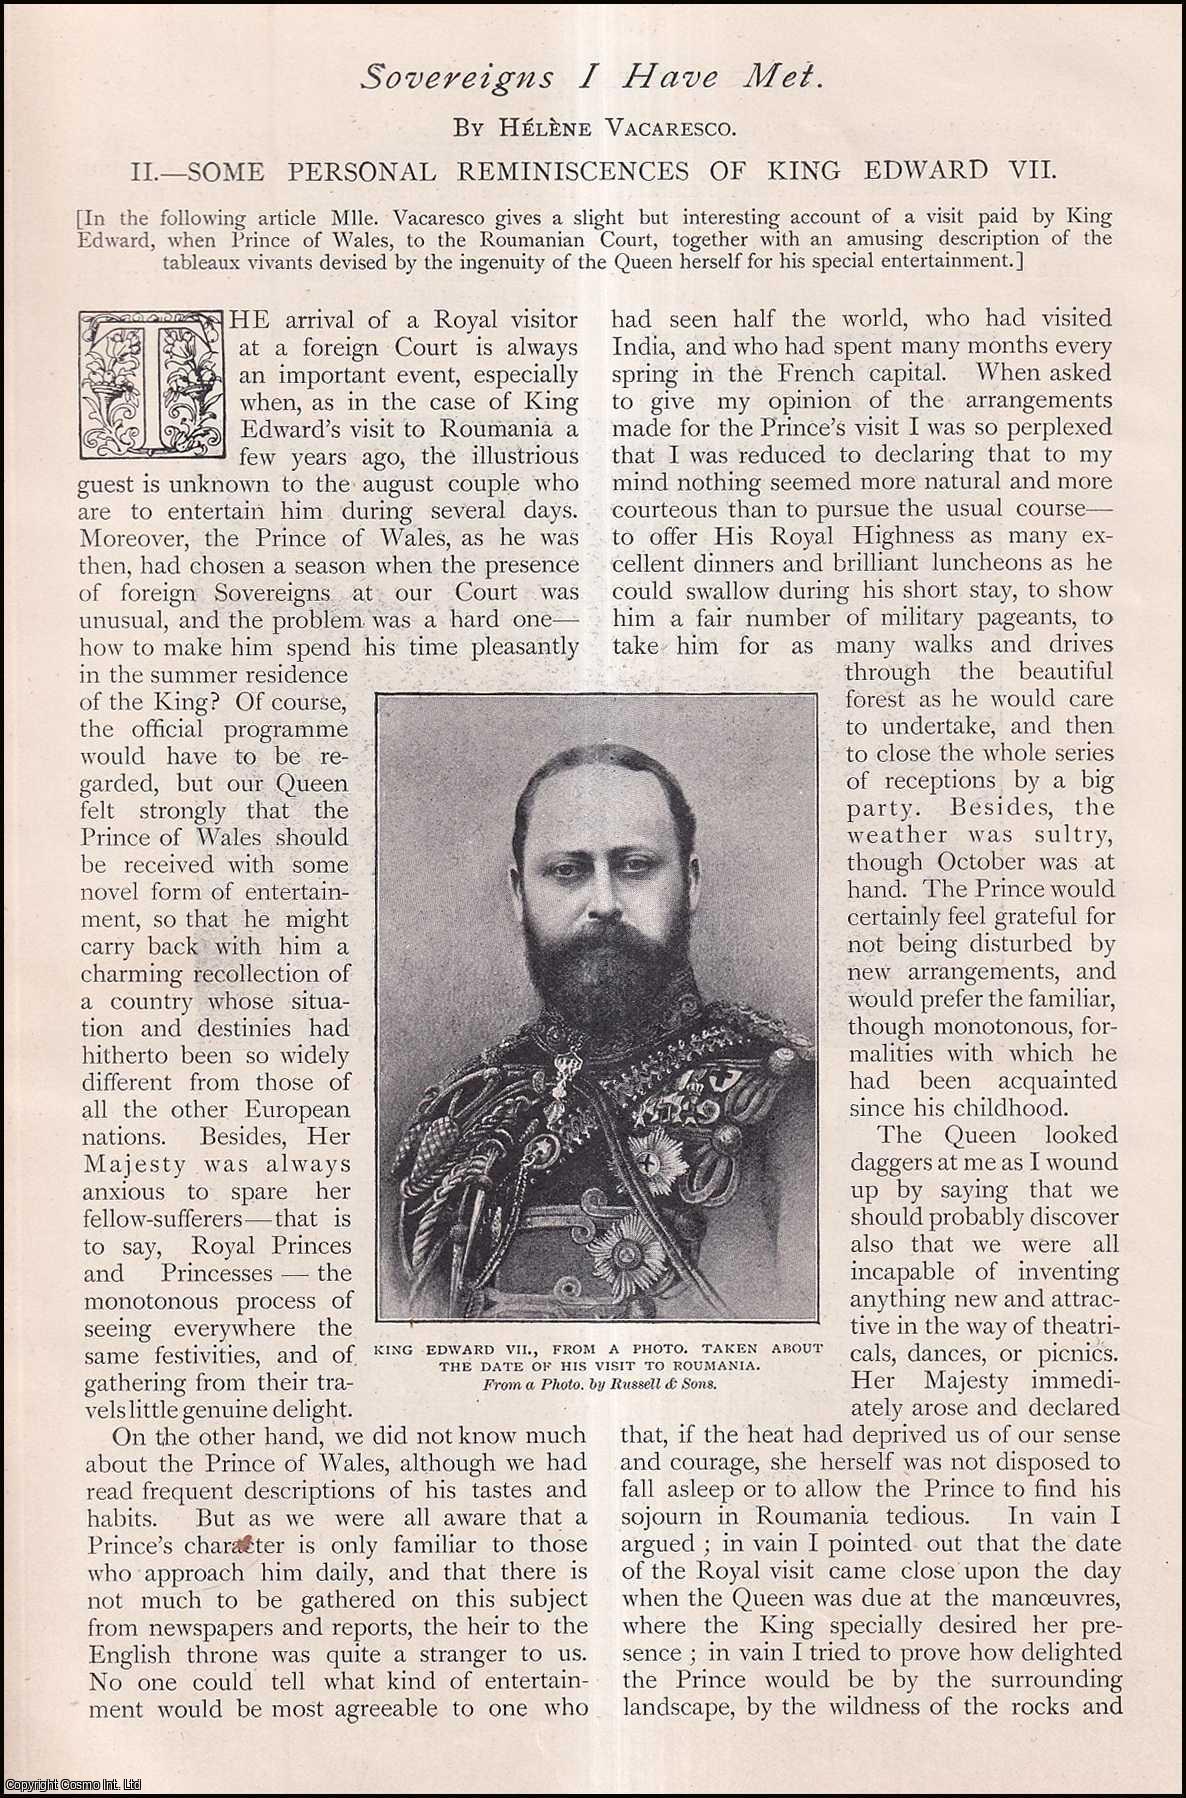 Helene Vacaresco - Some Personal Reminiscences of Edward VII. Sovereigns I have met. An uncommon original article from The Strand Magazine, 1903.